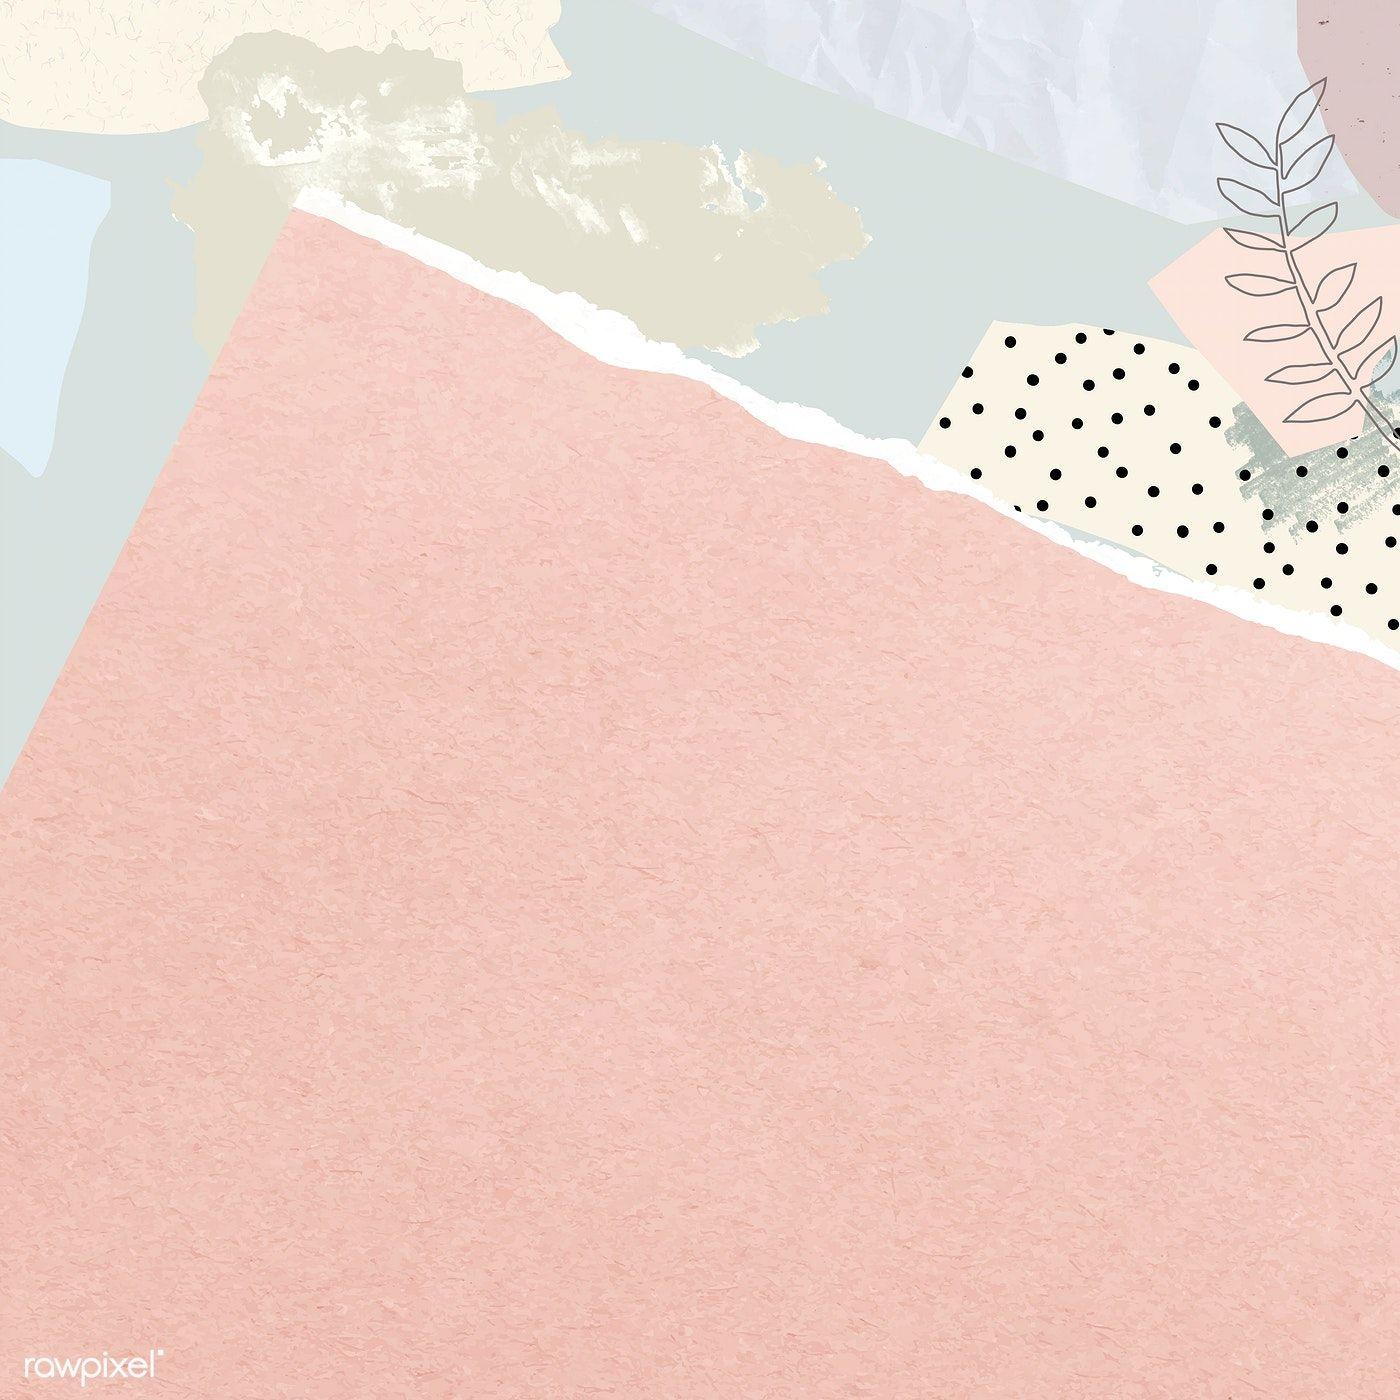 1400 x 1400 · jpeg - Blank pink ripped notepaper vector | premium image by rawpixel ...